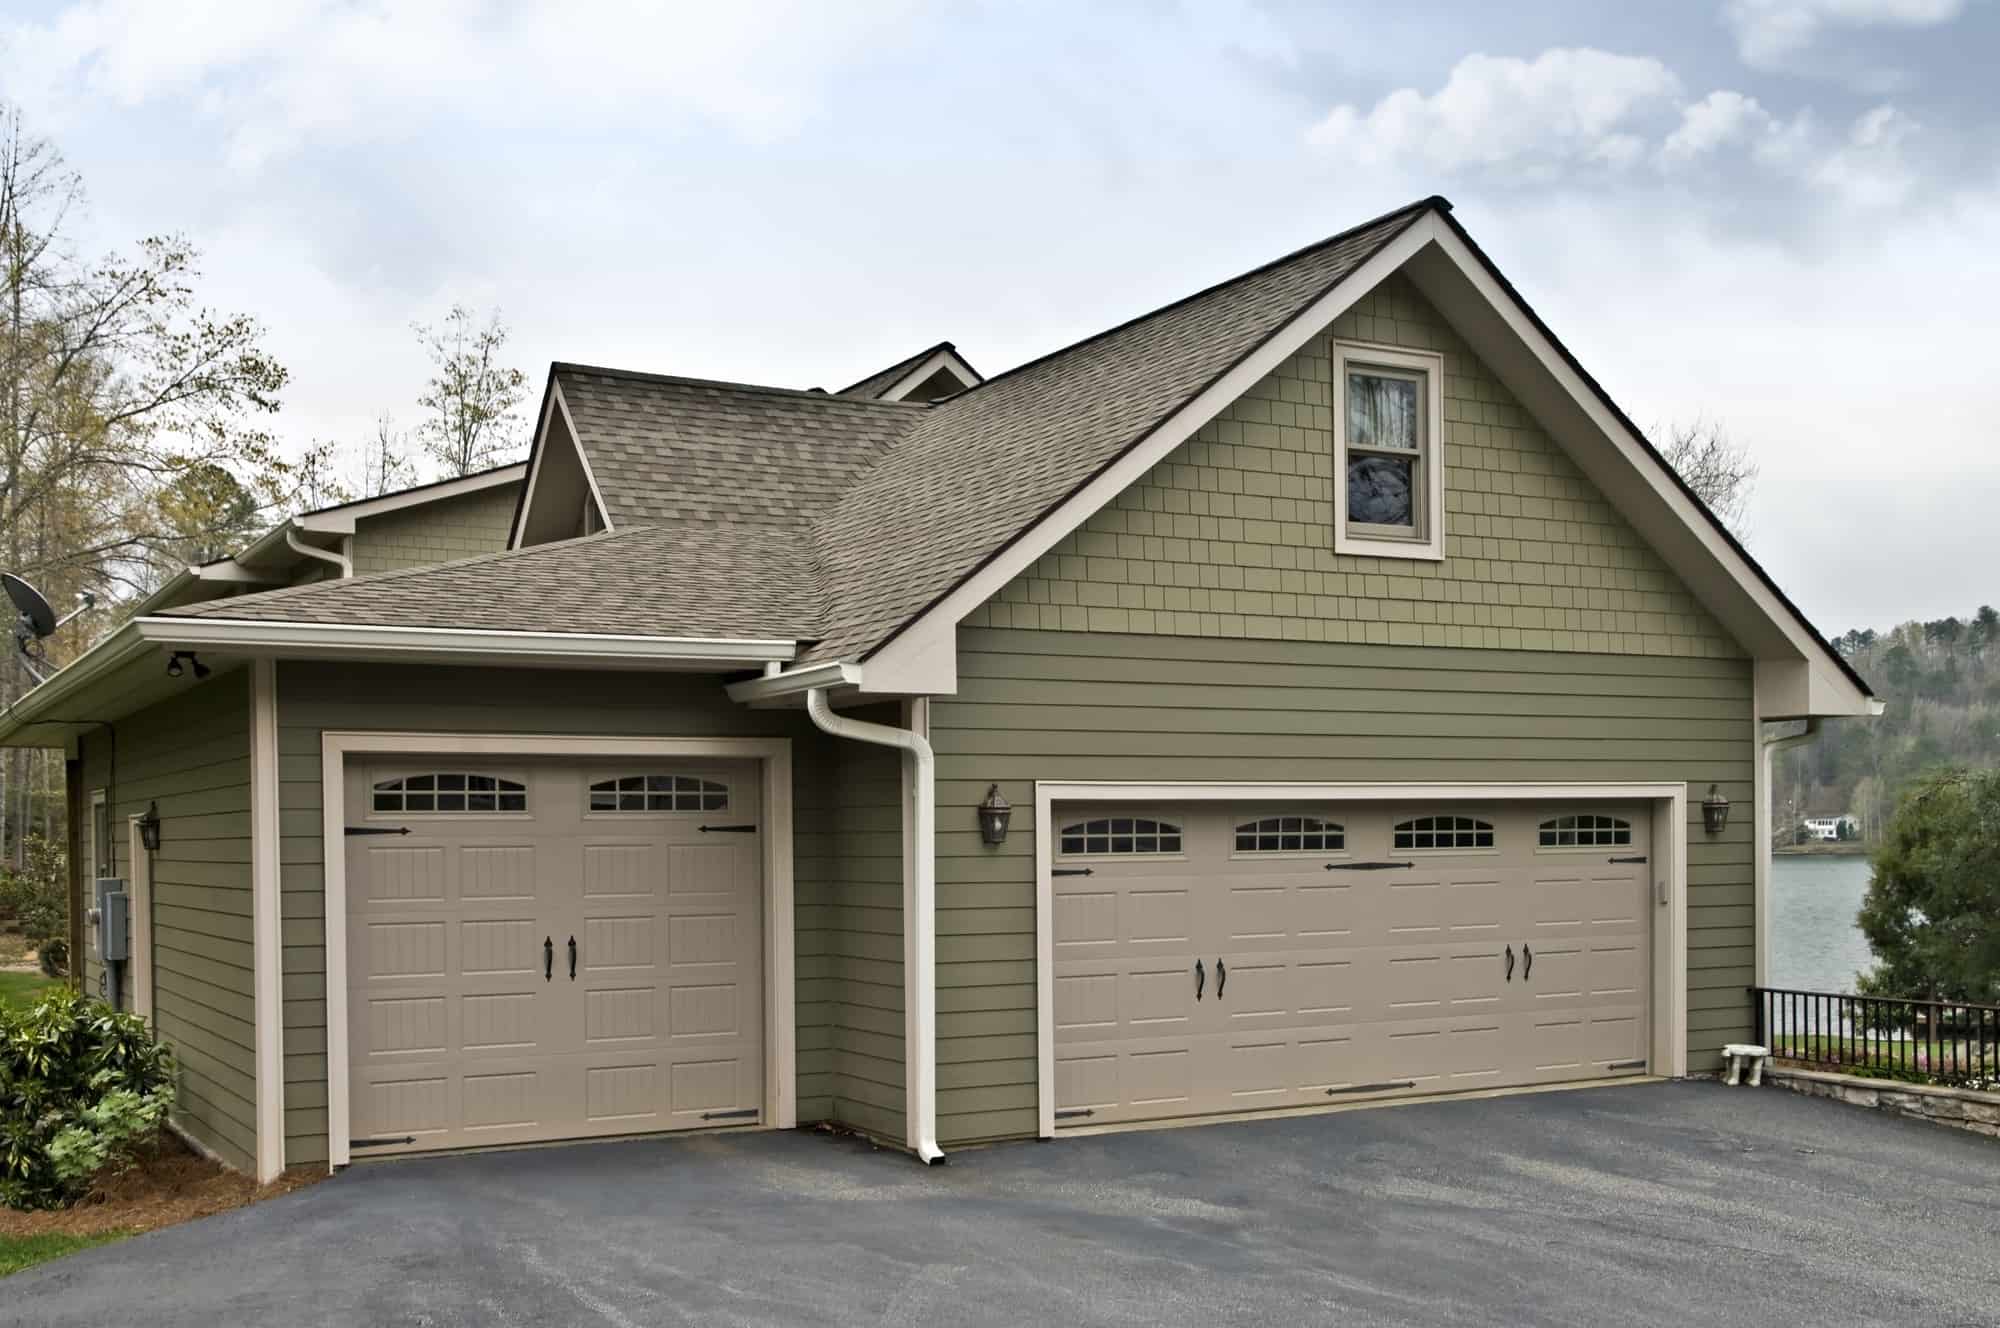 How Much Does It Cost To Repair A Garage Door?